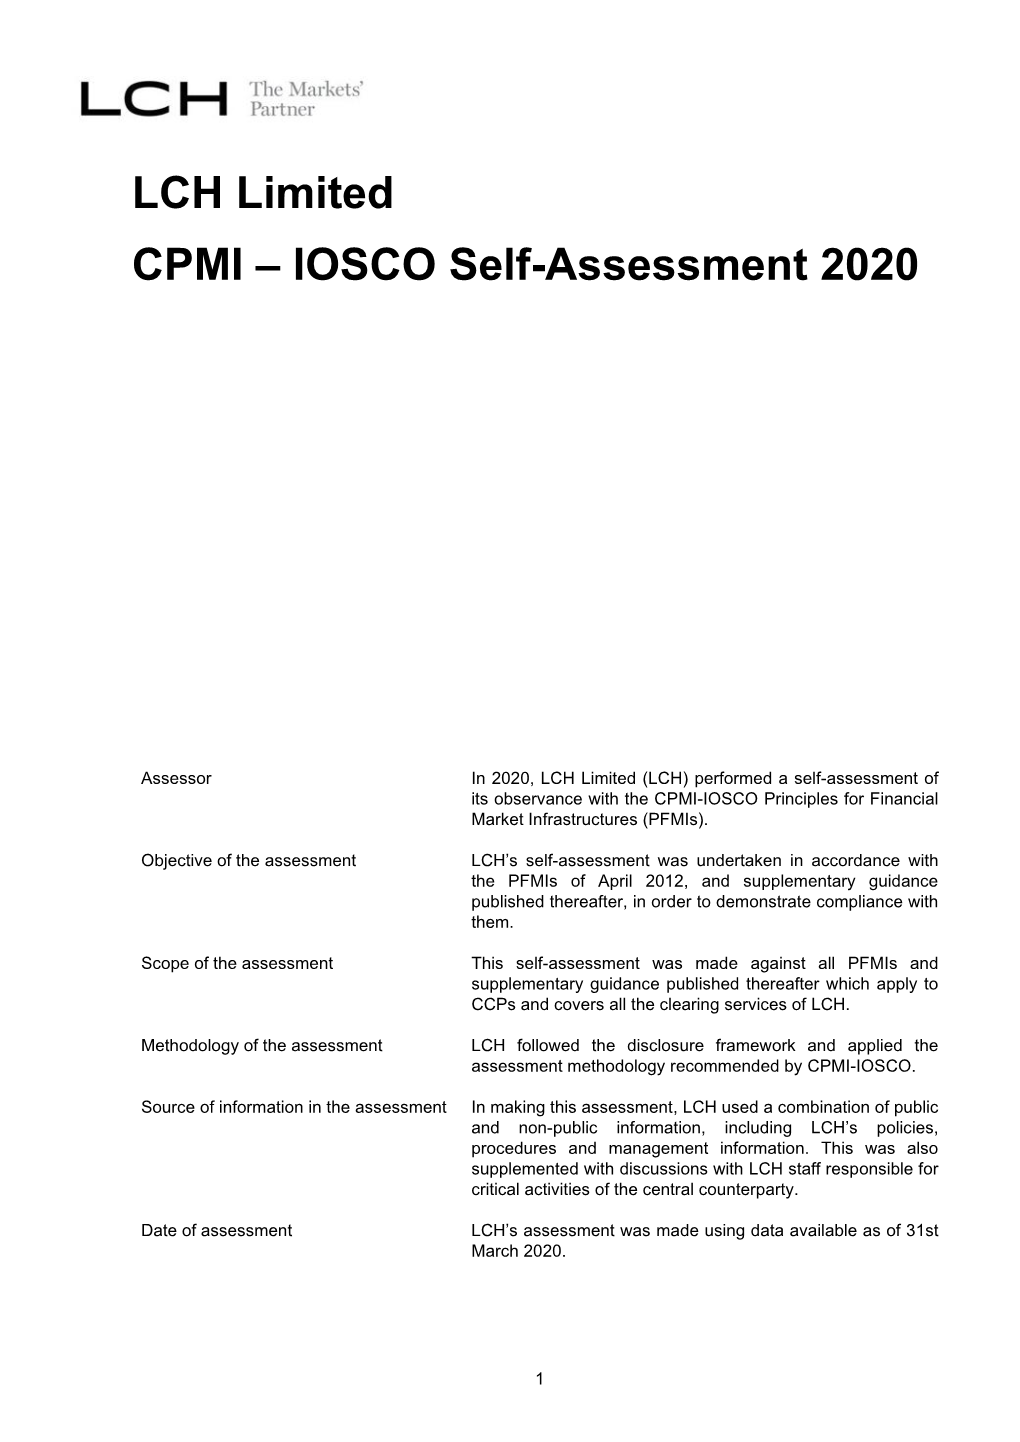 LCH Limited CPMI – IOSCO Self-Assessment 2020